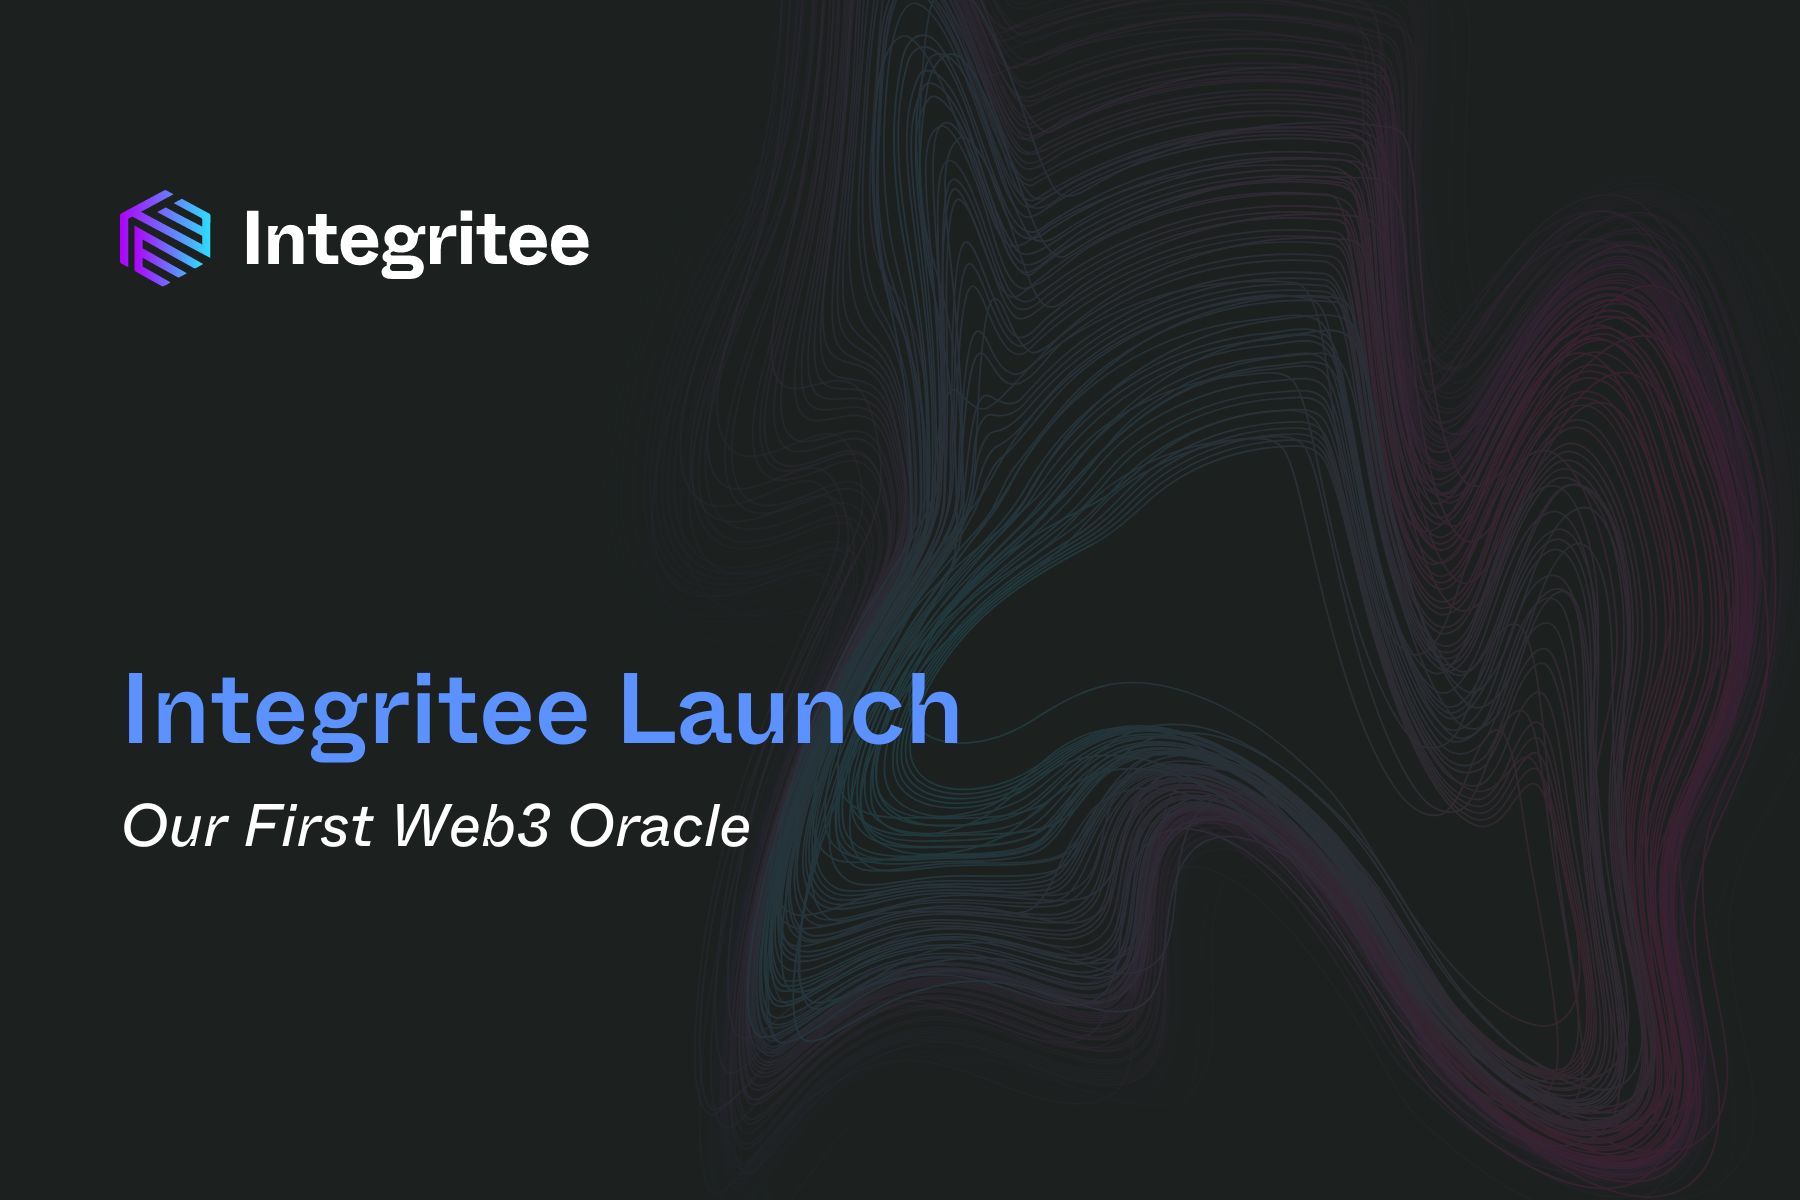 Integritee Launches its First Web3 Oracle